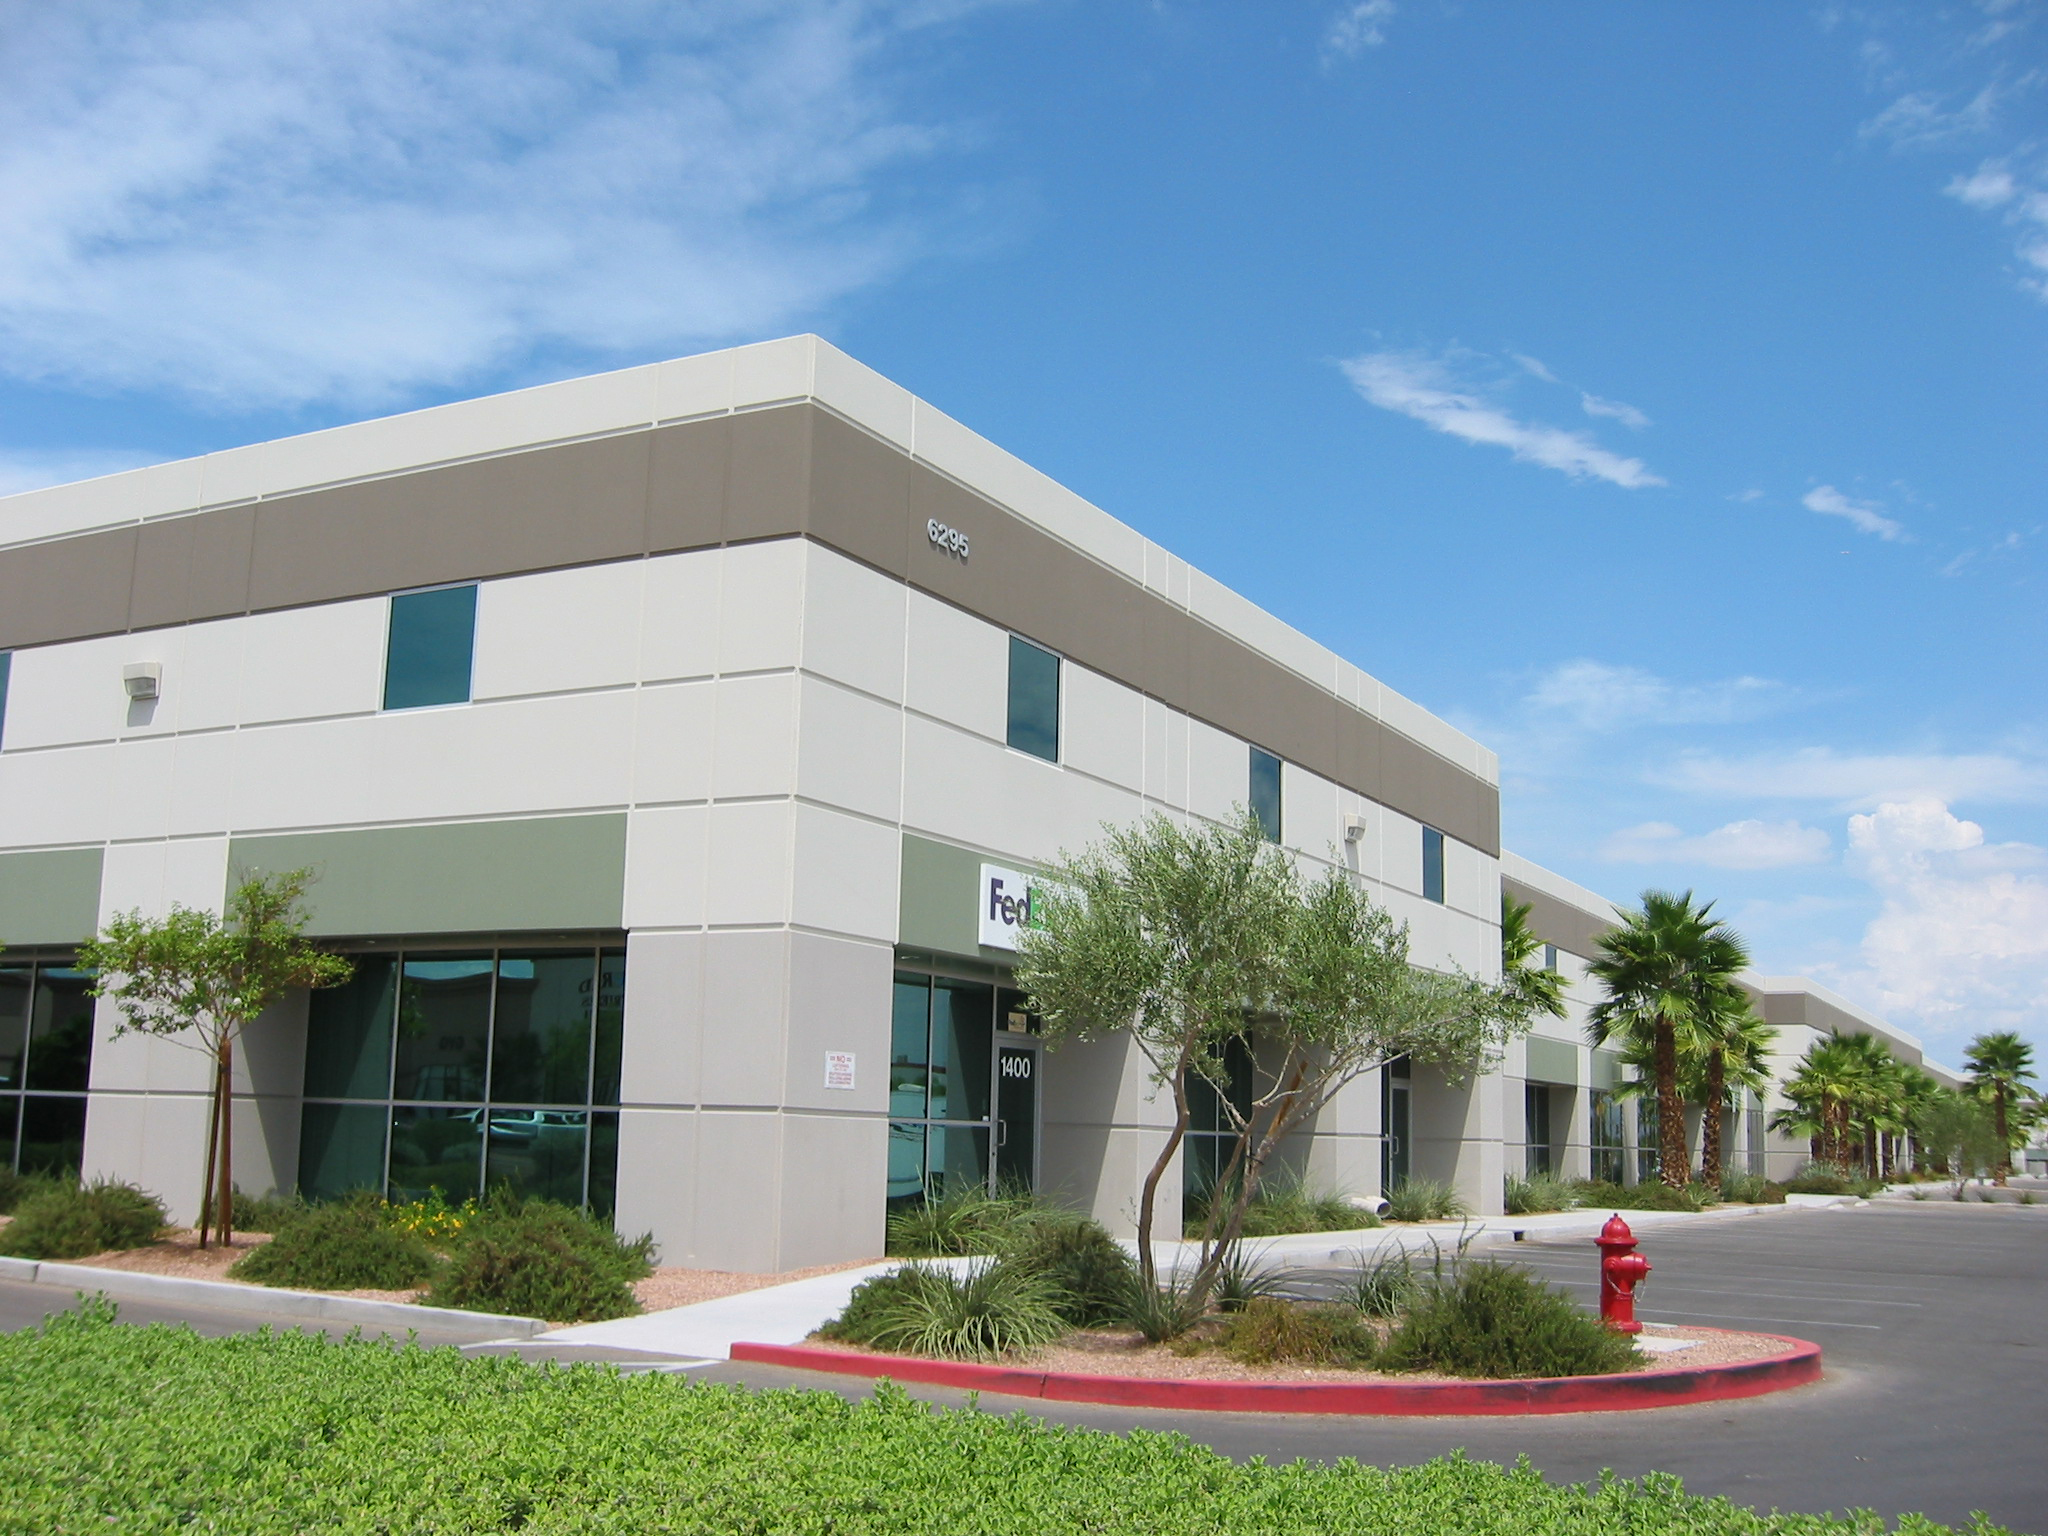 Colliers International announced the finalization of a lease to an industrial property located at 6275 S. Pearl St.